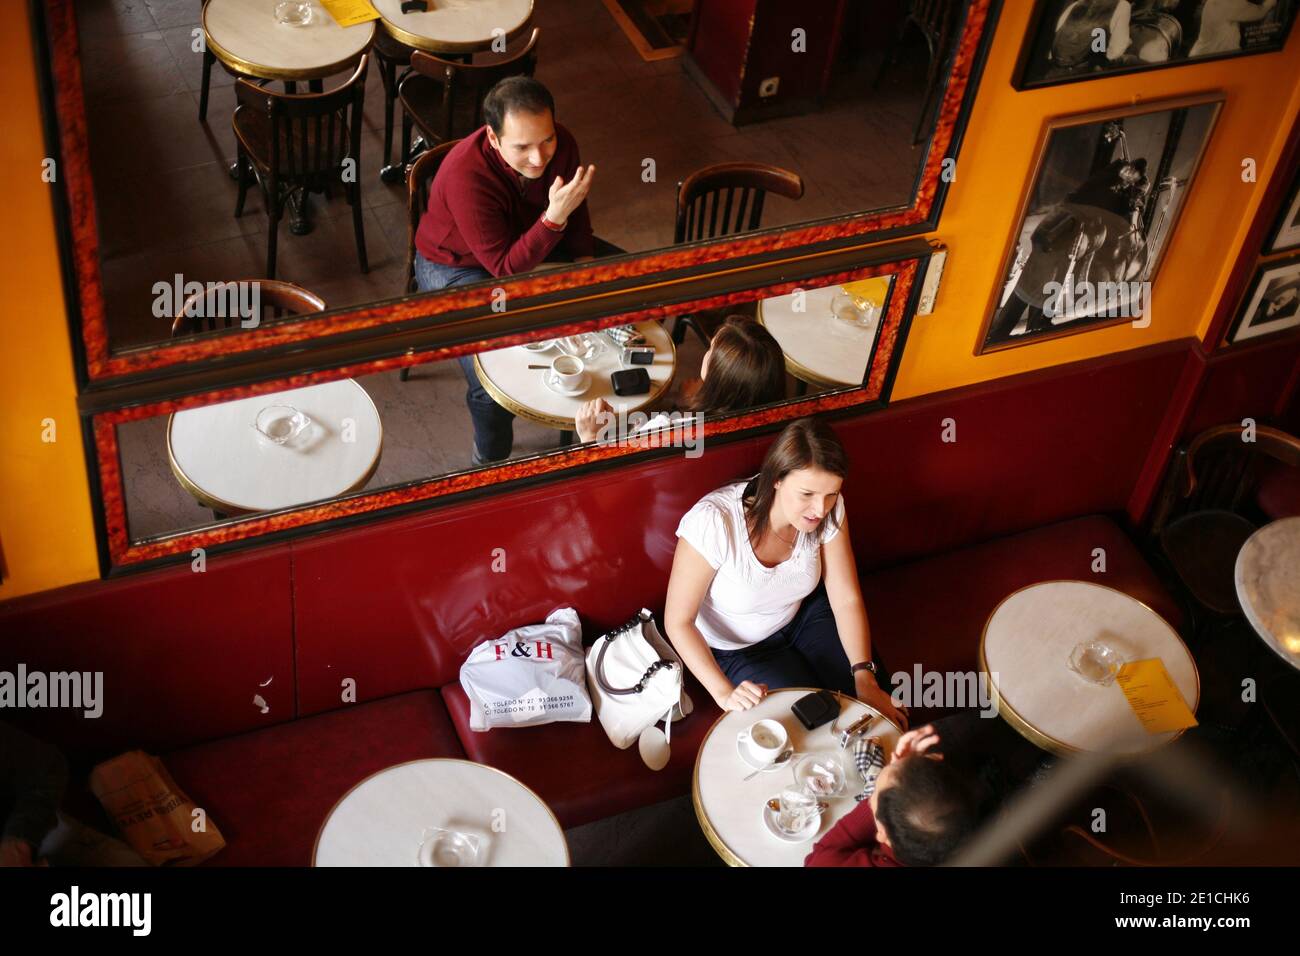 Guests at Cafe del Real in Plaza Isabel II as seen through a mirror. Stock Photo